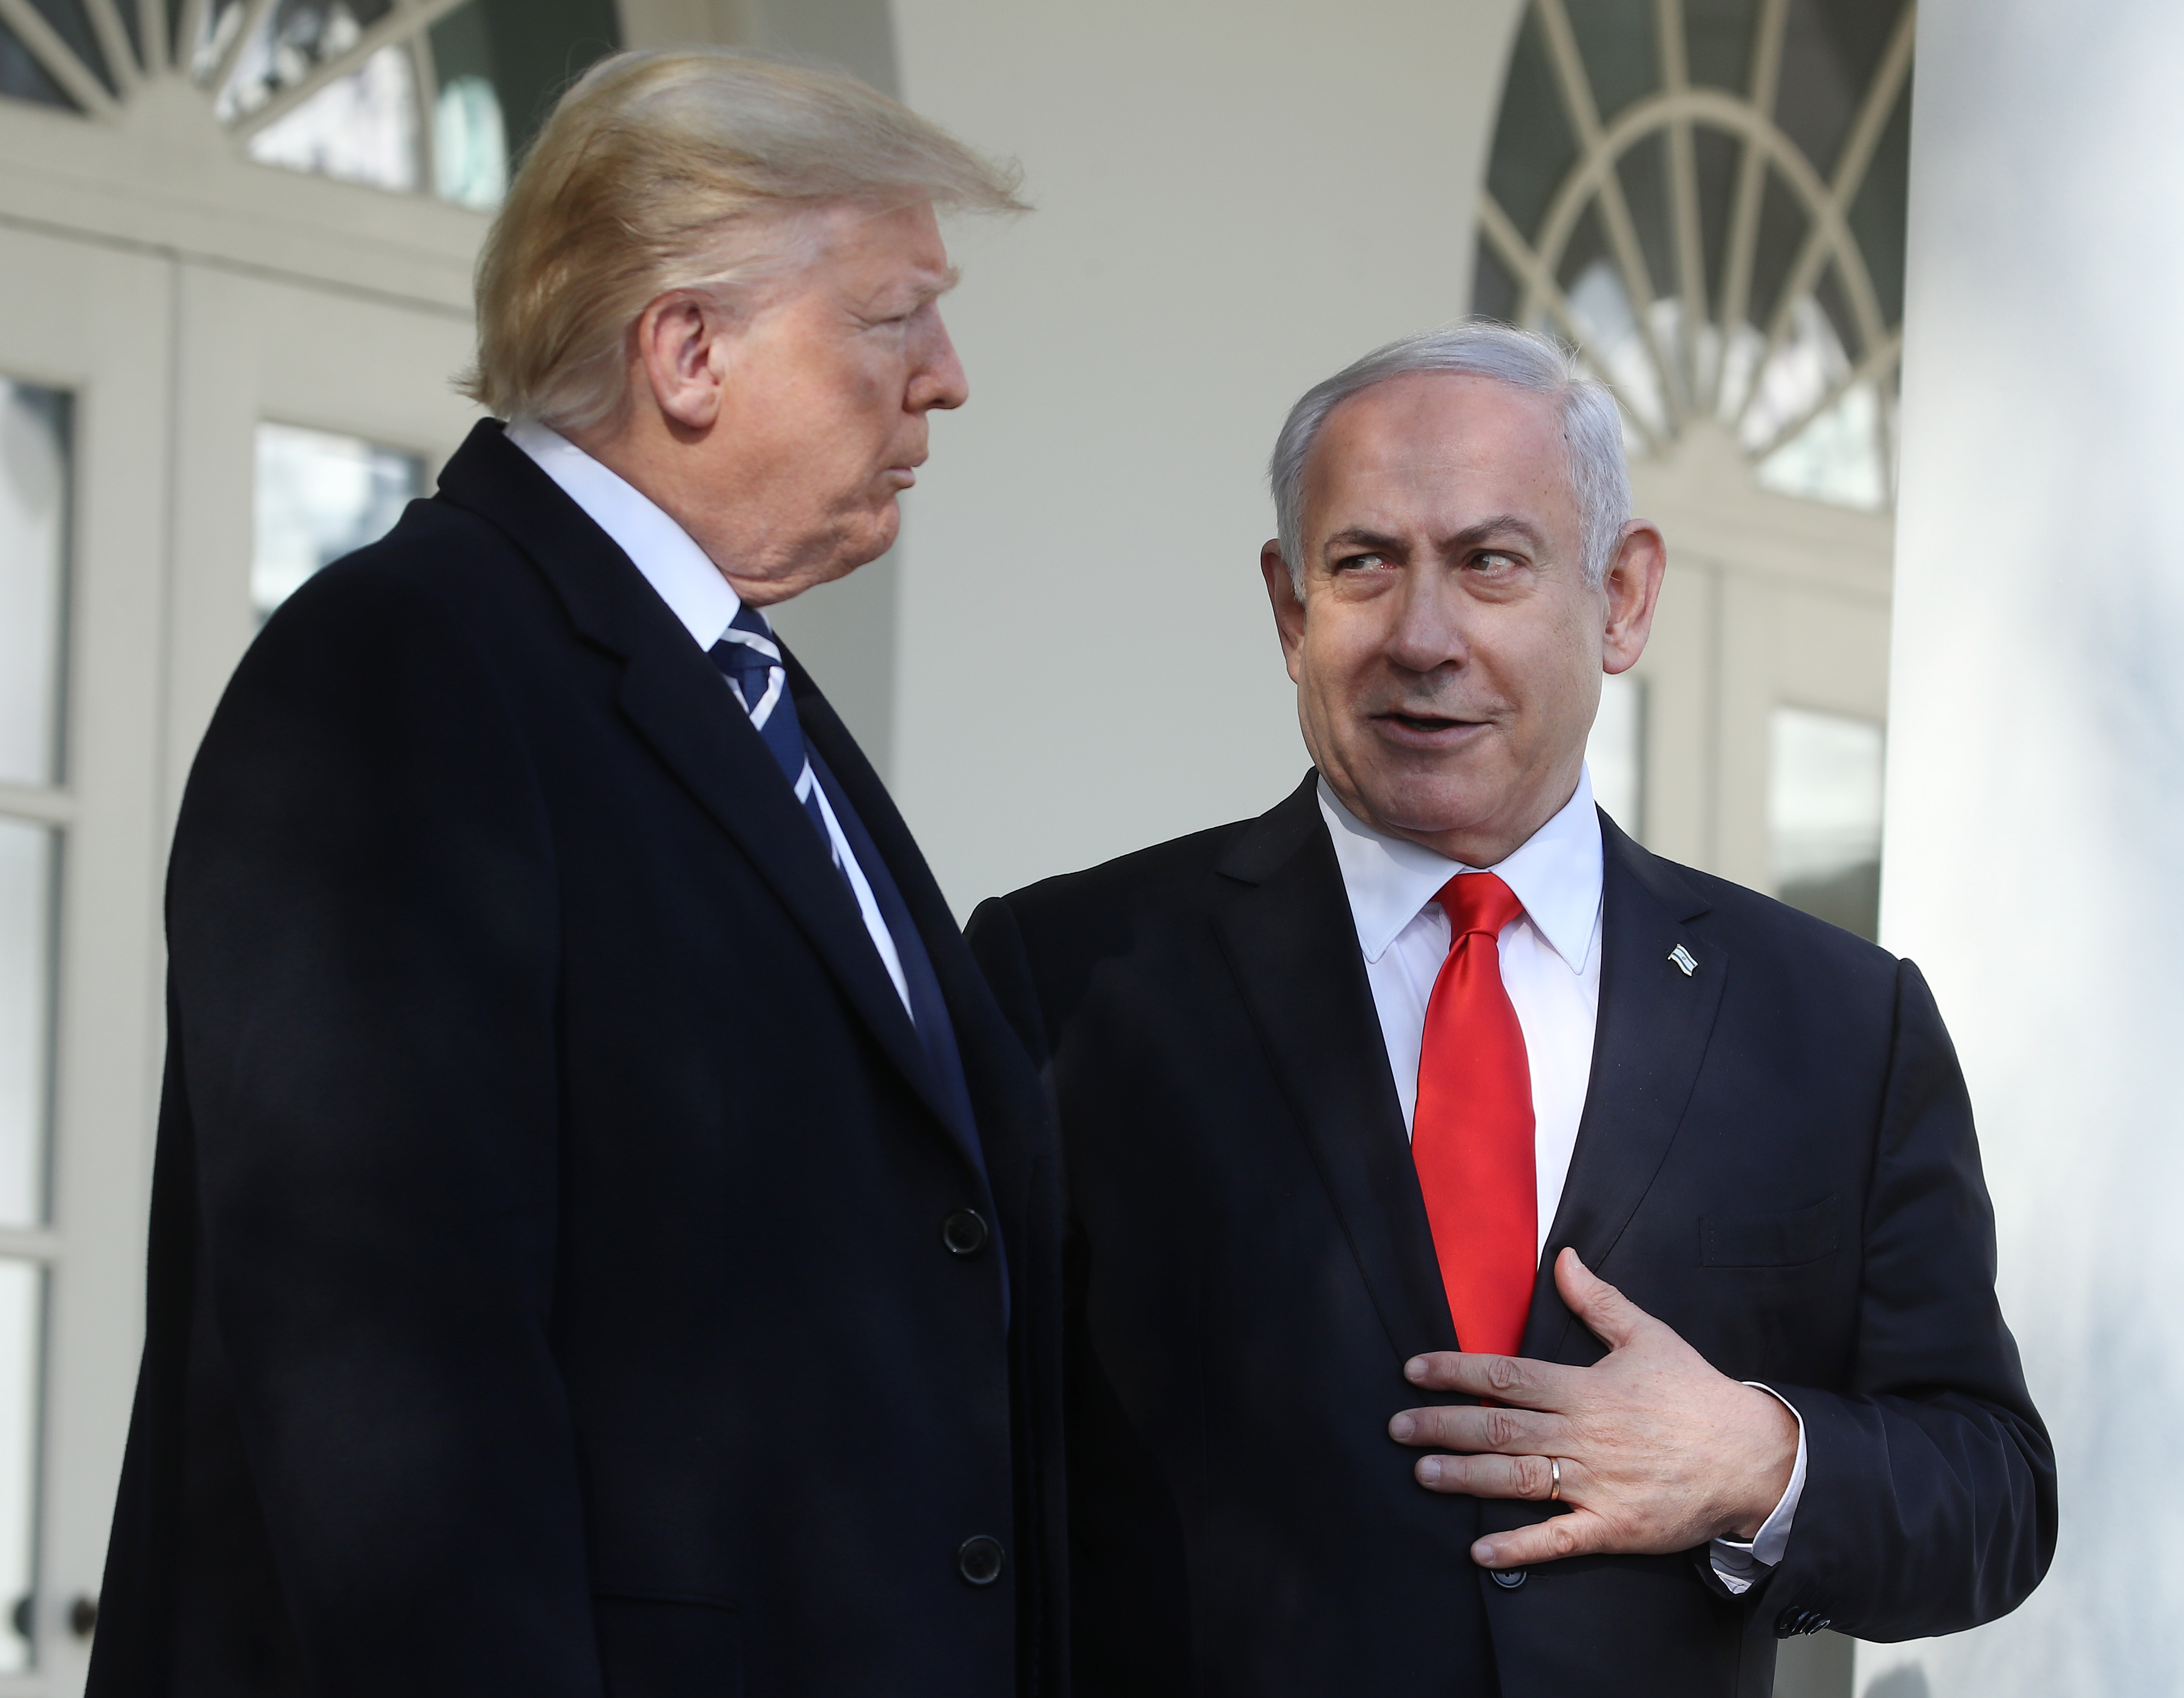 President Donald Trump and&nbsp;Israeli Prime Minister Benjamin Netanyahu&nbsp;talk to reporters at the White House on January 27, 2020 in Washington, DC.